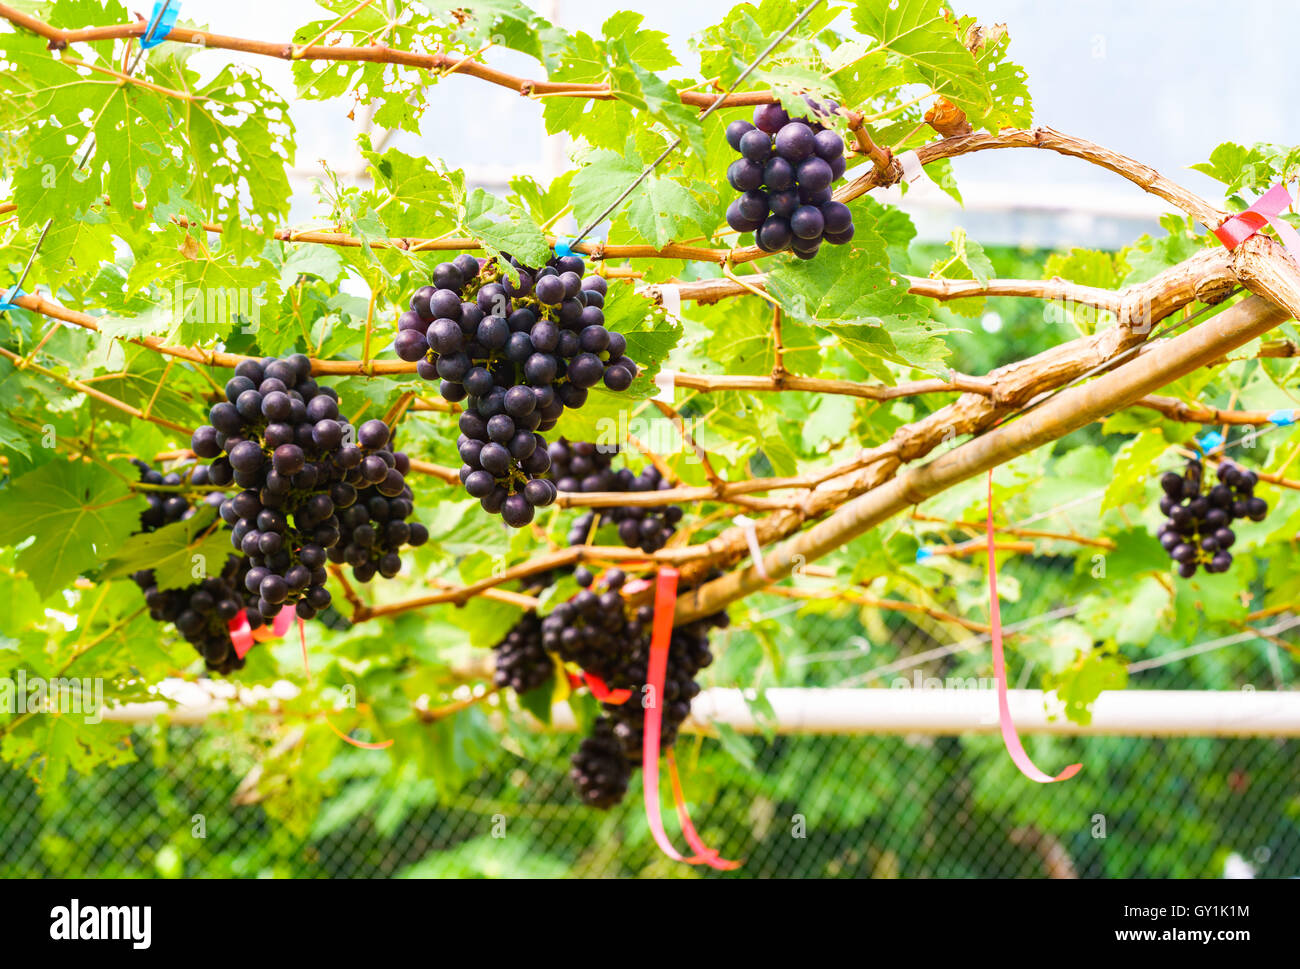 Marroo Seedless grapes on a vine Stock Photo